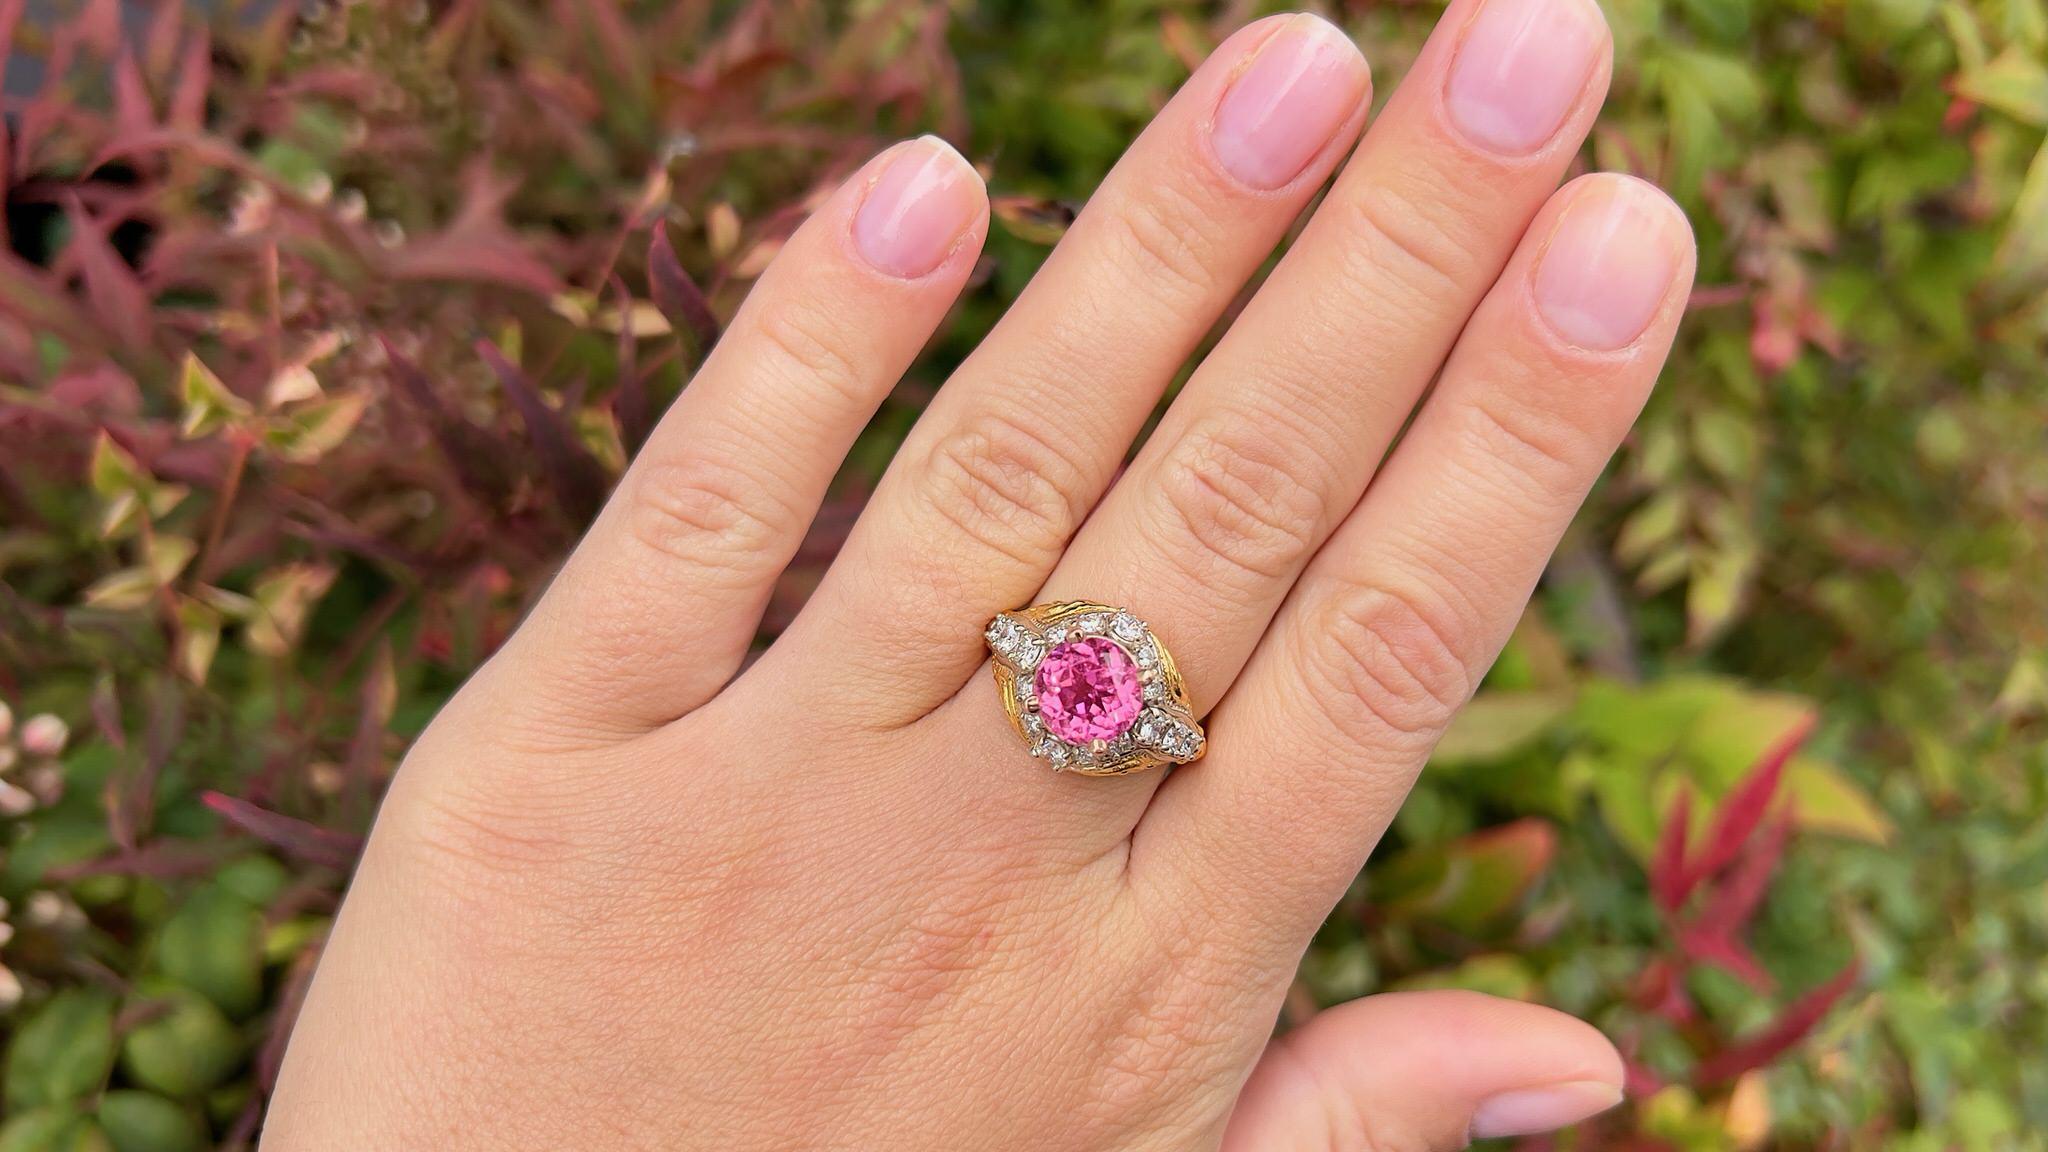 Fine Pink Sapphire = 3 Carat
Diamonds = 0.60 Carats
(Color: F, Clarity: VS)
Metal: 14K Gold
Ring Size: 7.25 US
Jewelry Gift Box Included